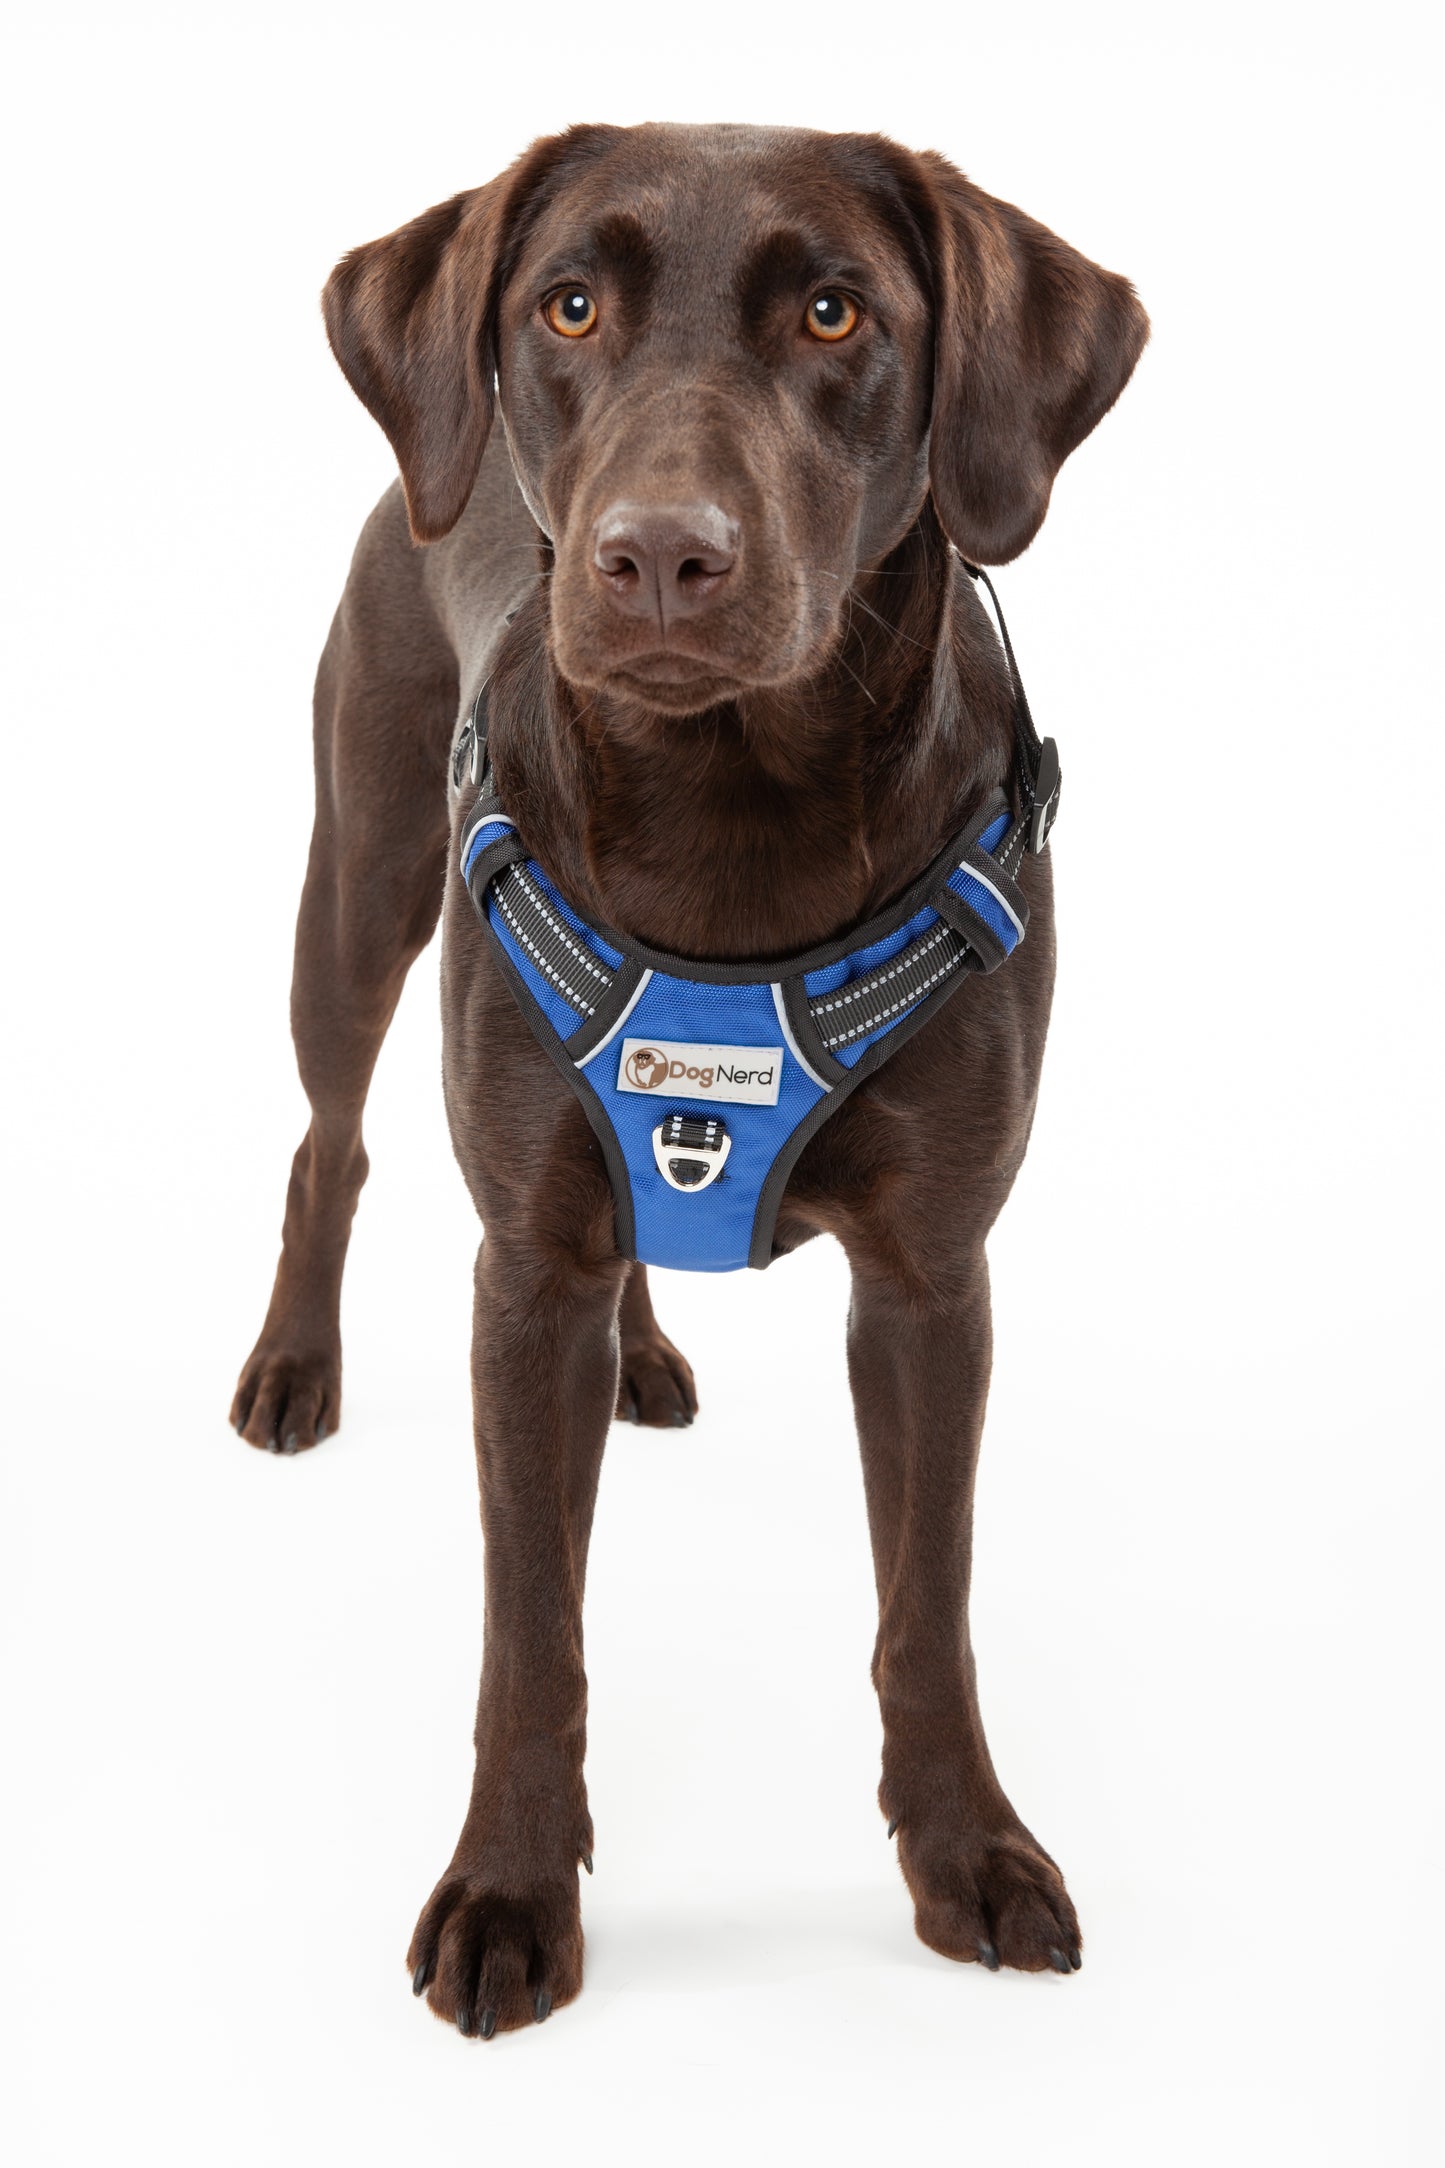 DogNerd No-Pull Harness - Large